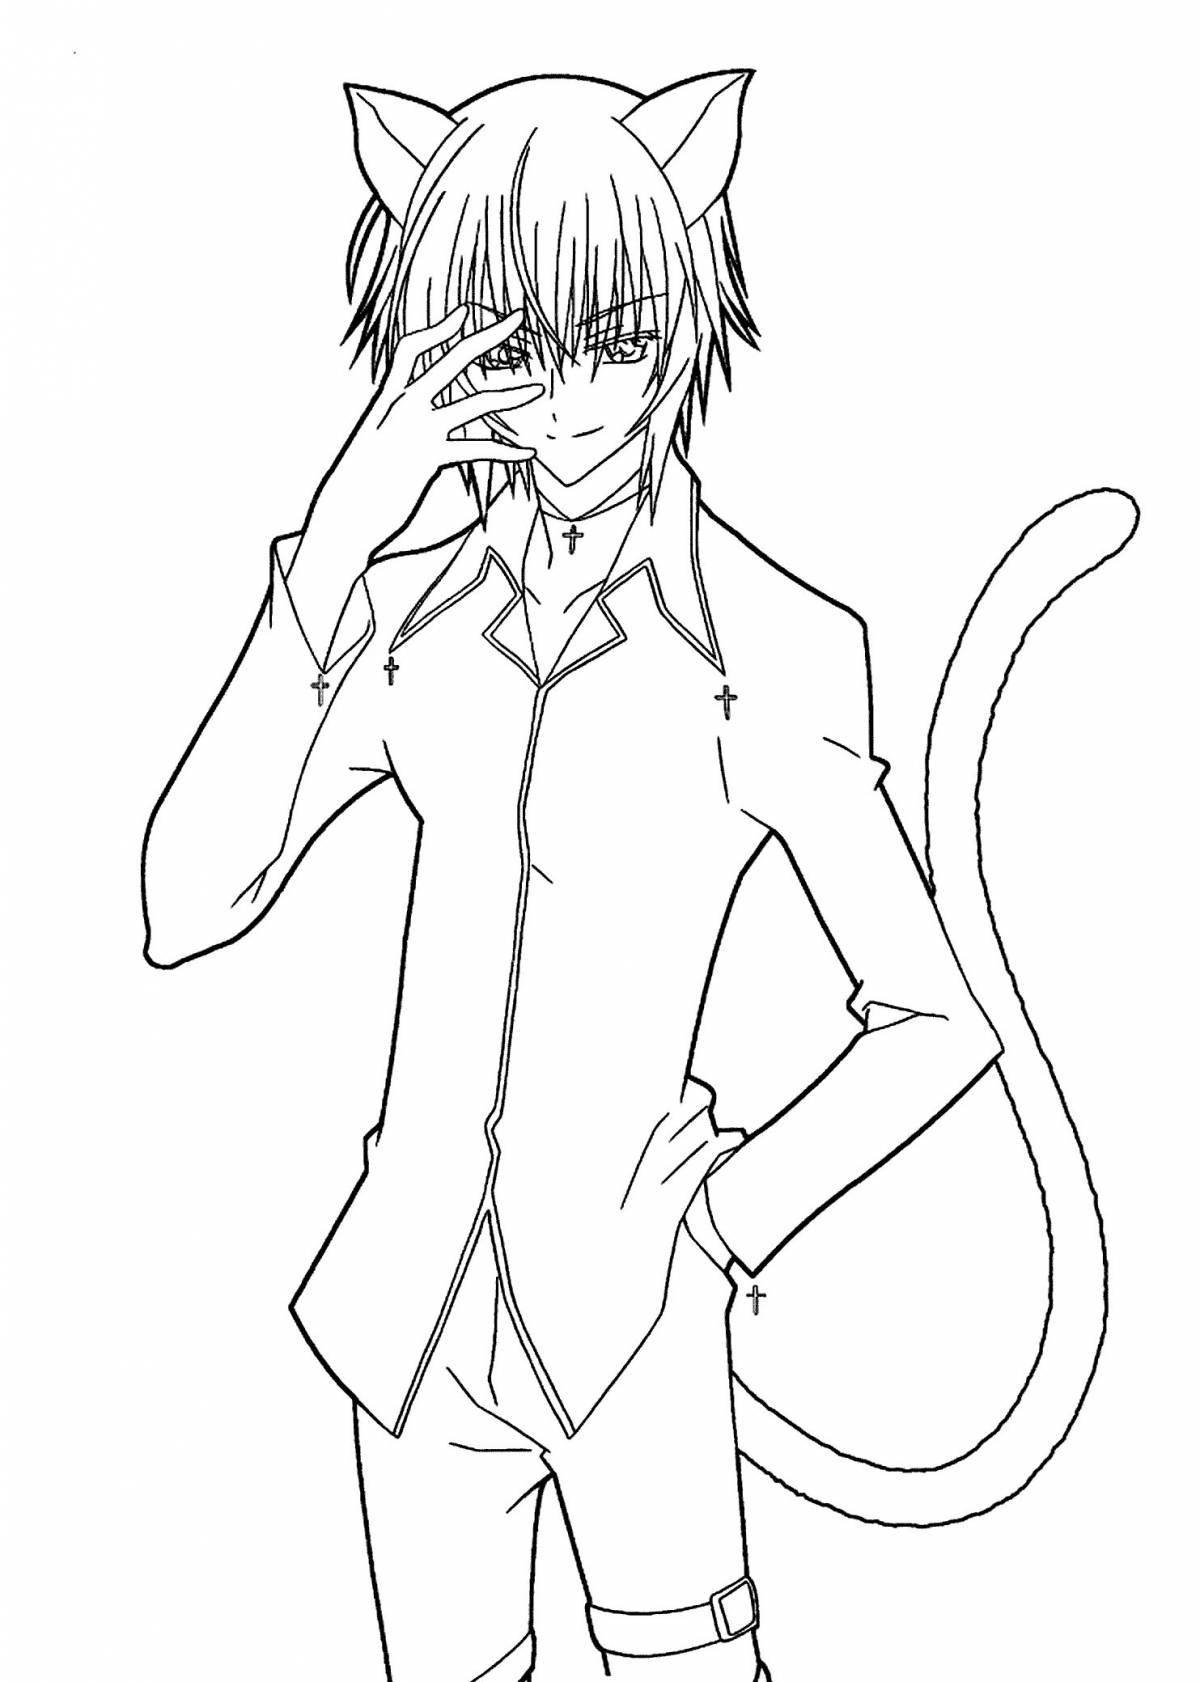 Coloring page dazzling cat man